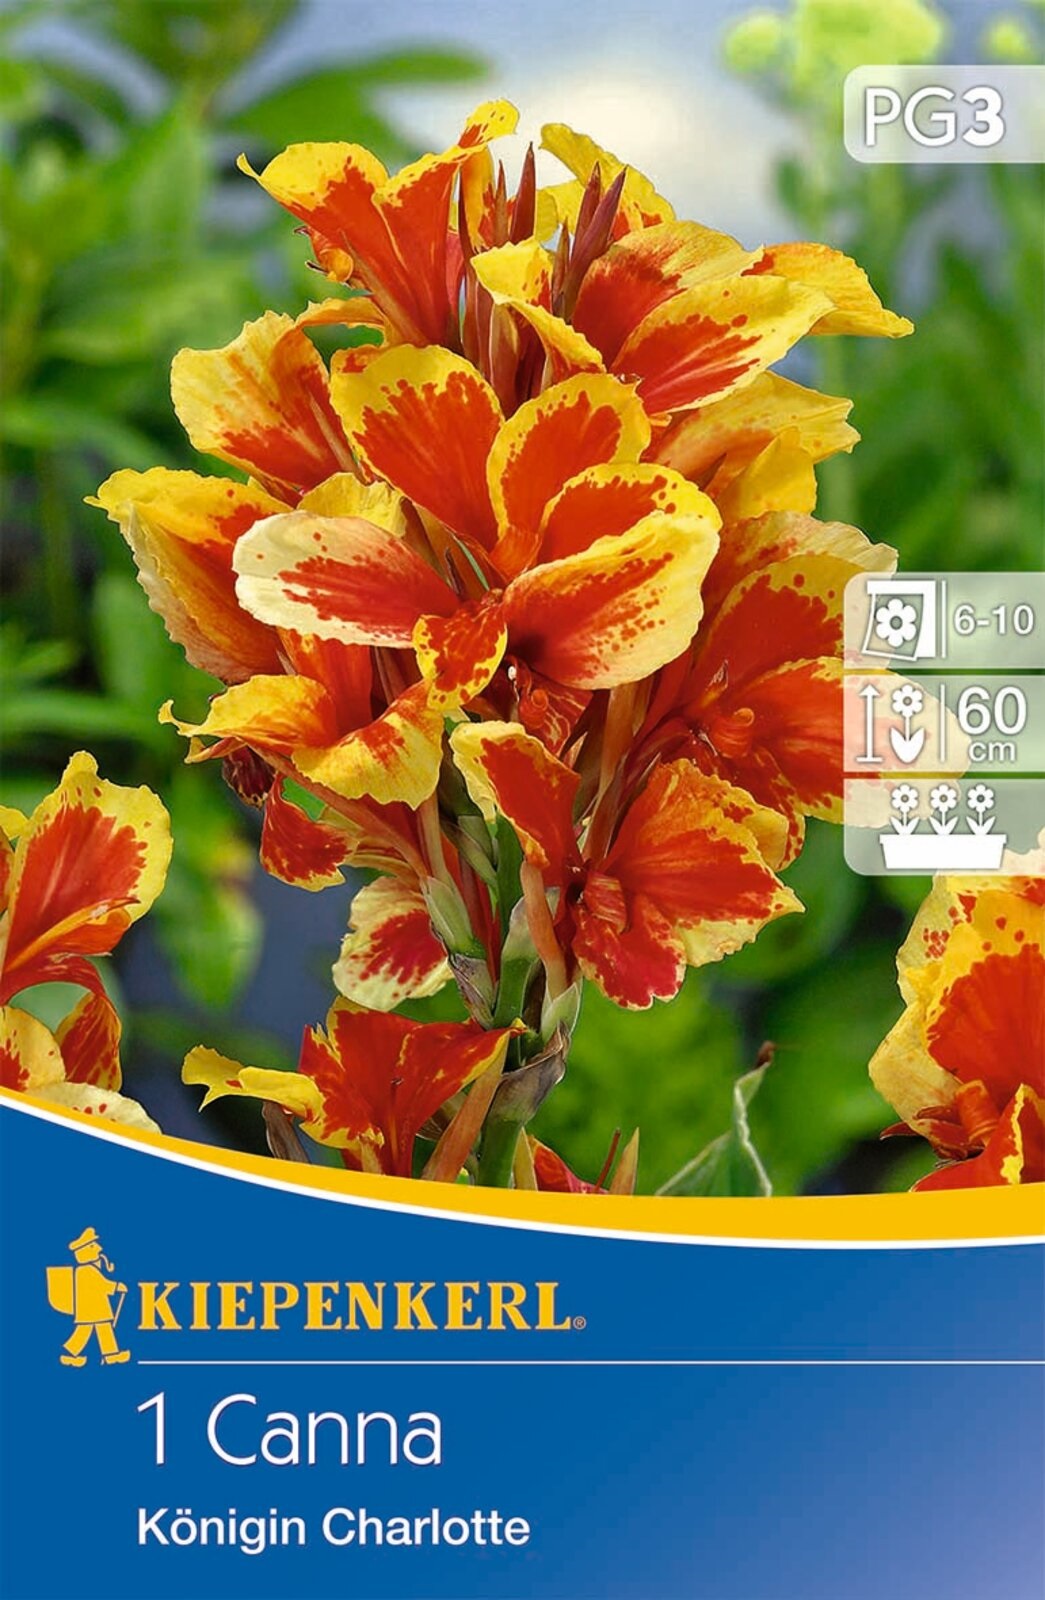 Bulb Dwarf Canna (Canna) Queen Charlotte (yellow-red) Kiepenkerl 1 pc